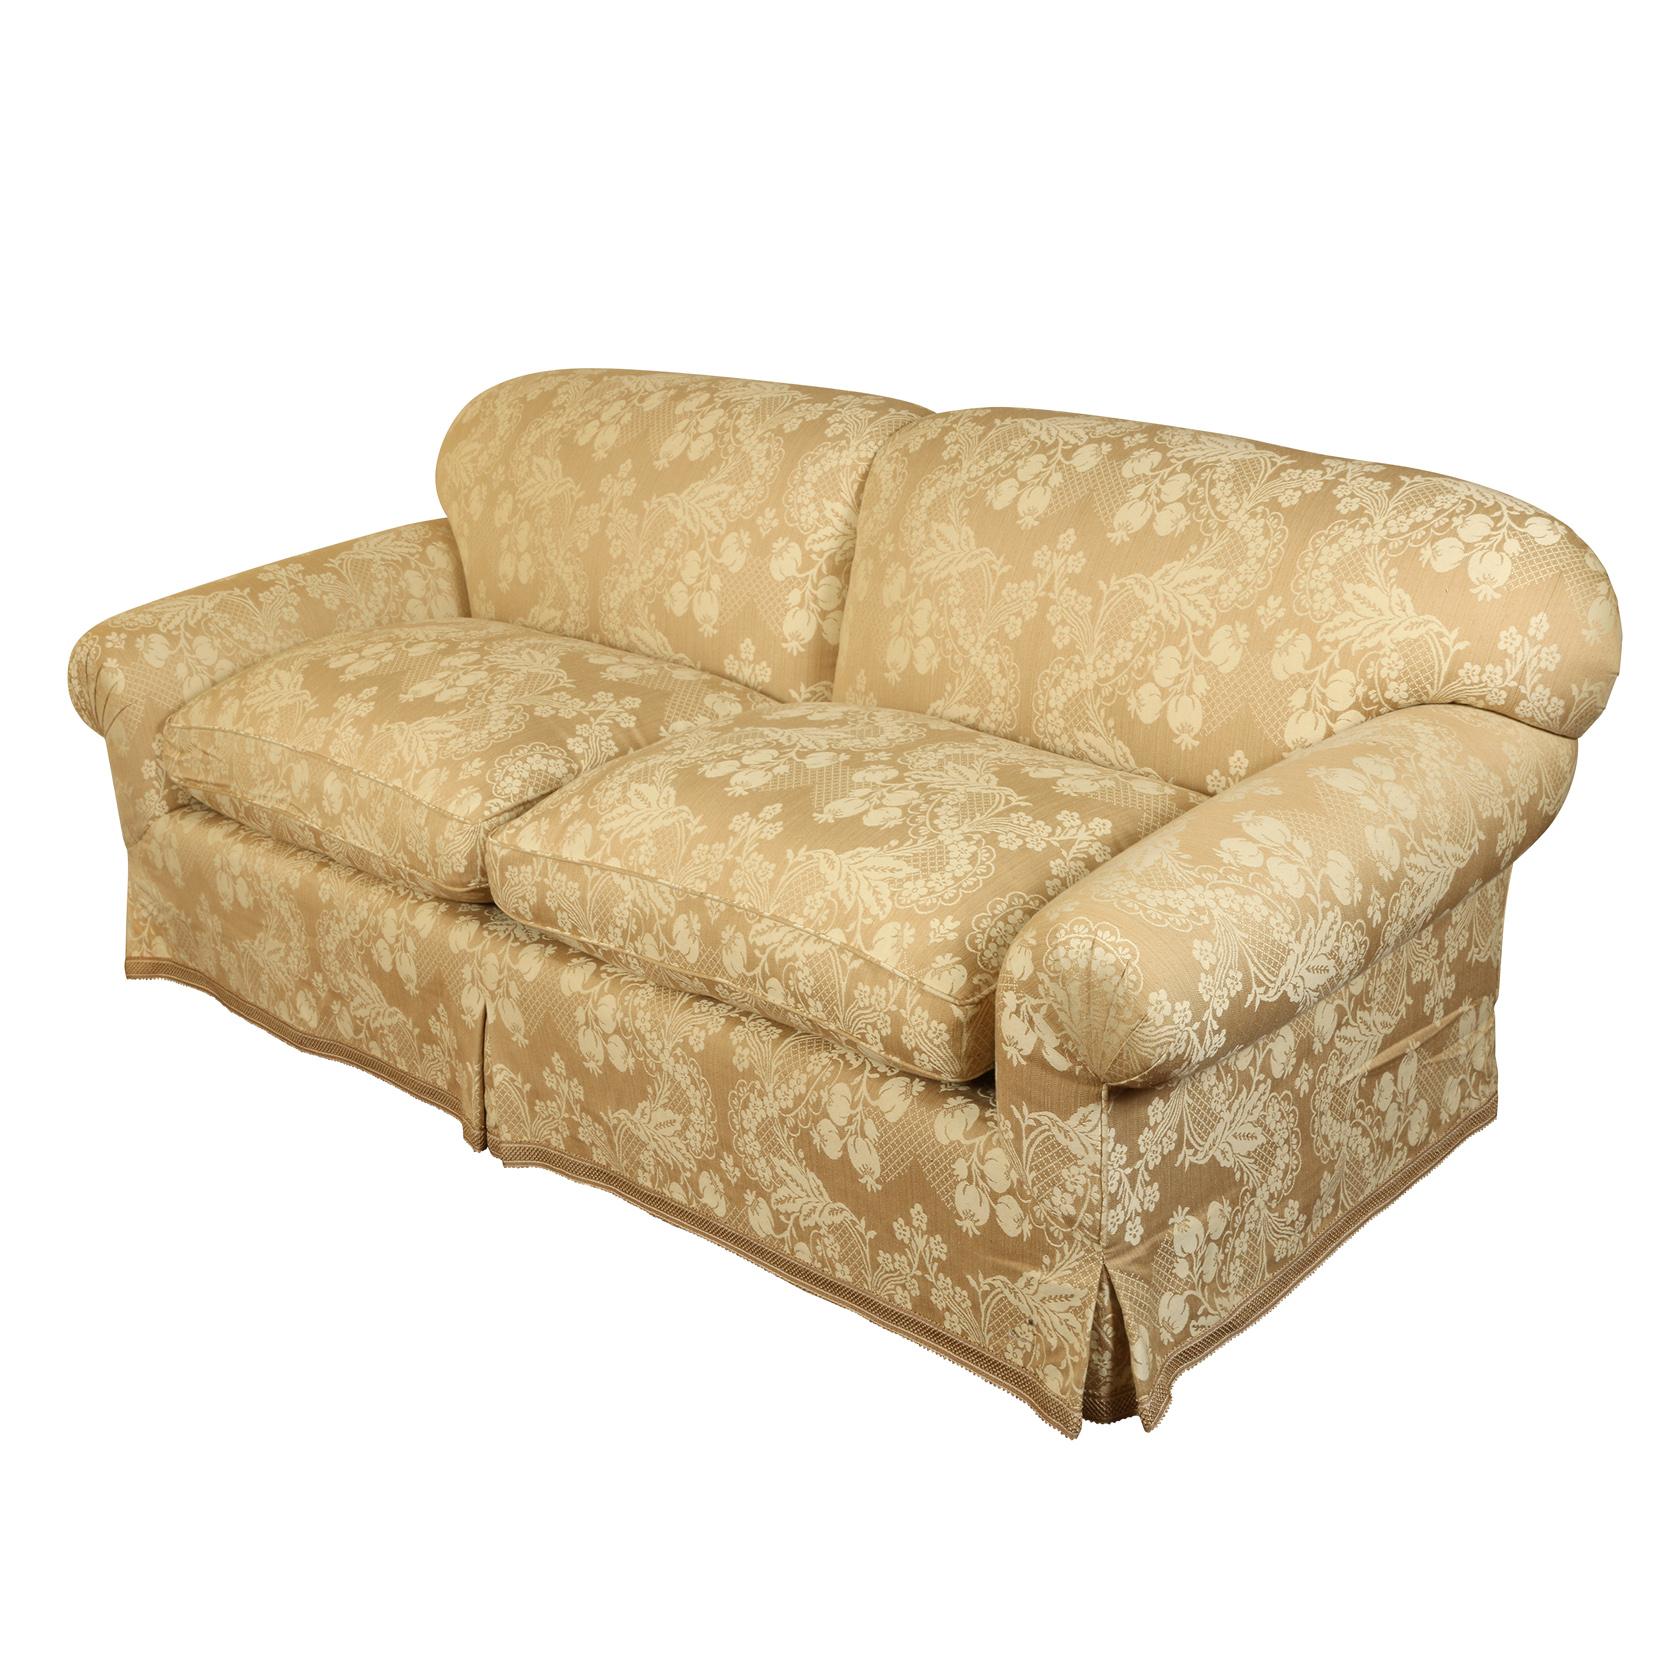 English roll arm sofa in a custom Brunschwig and Fils neutral floral, beige and ivory fabric.